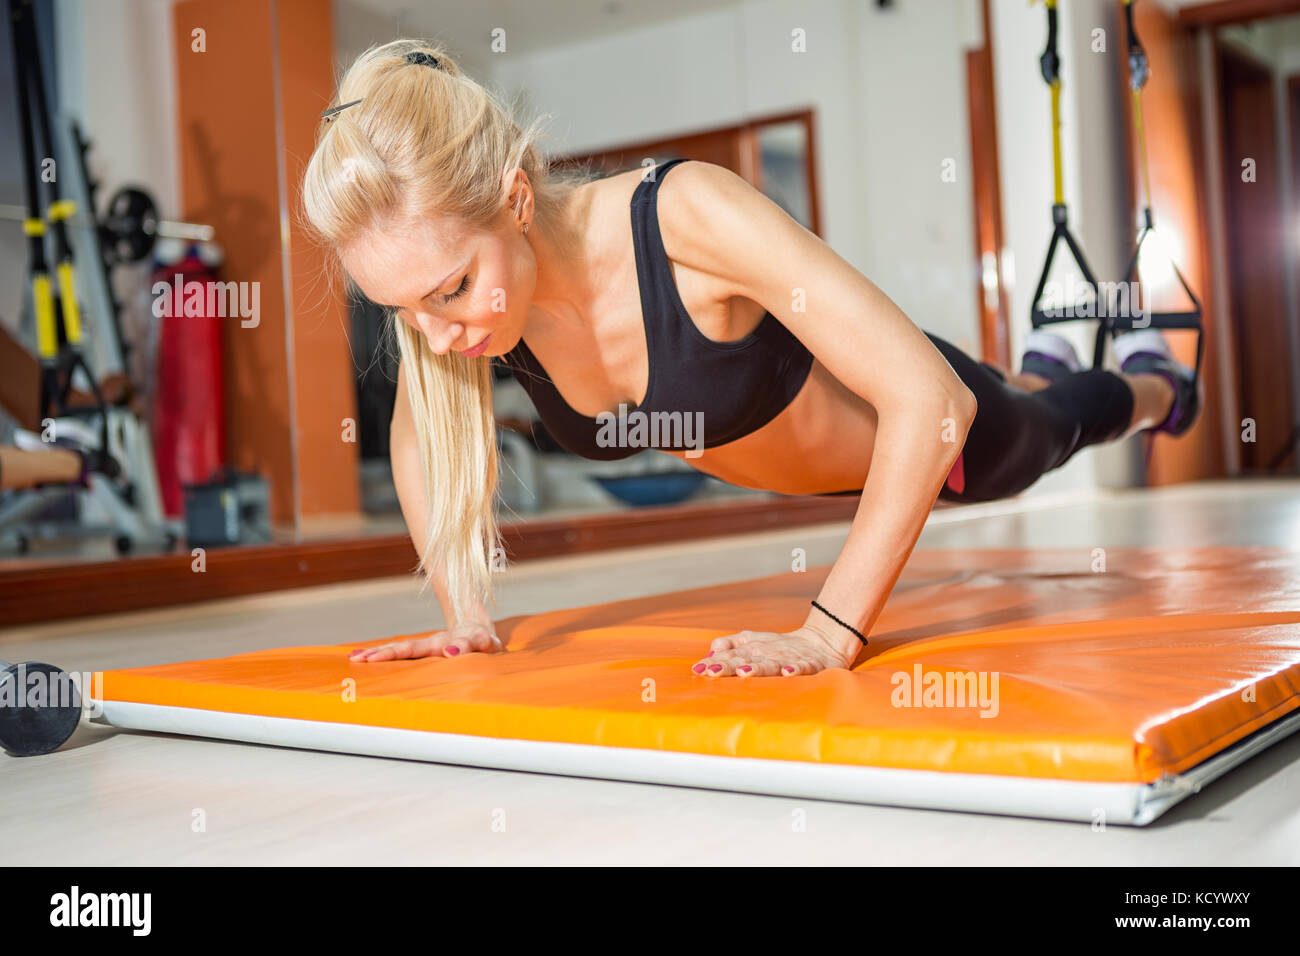 fit woman in fitness salon in push up pose exercise Stock Photo